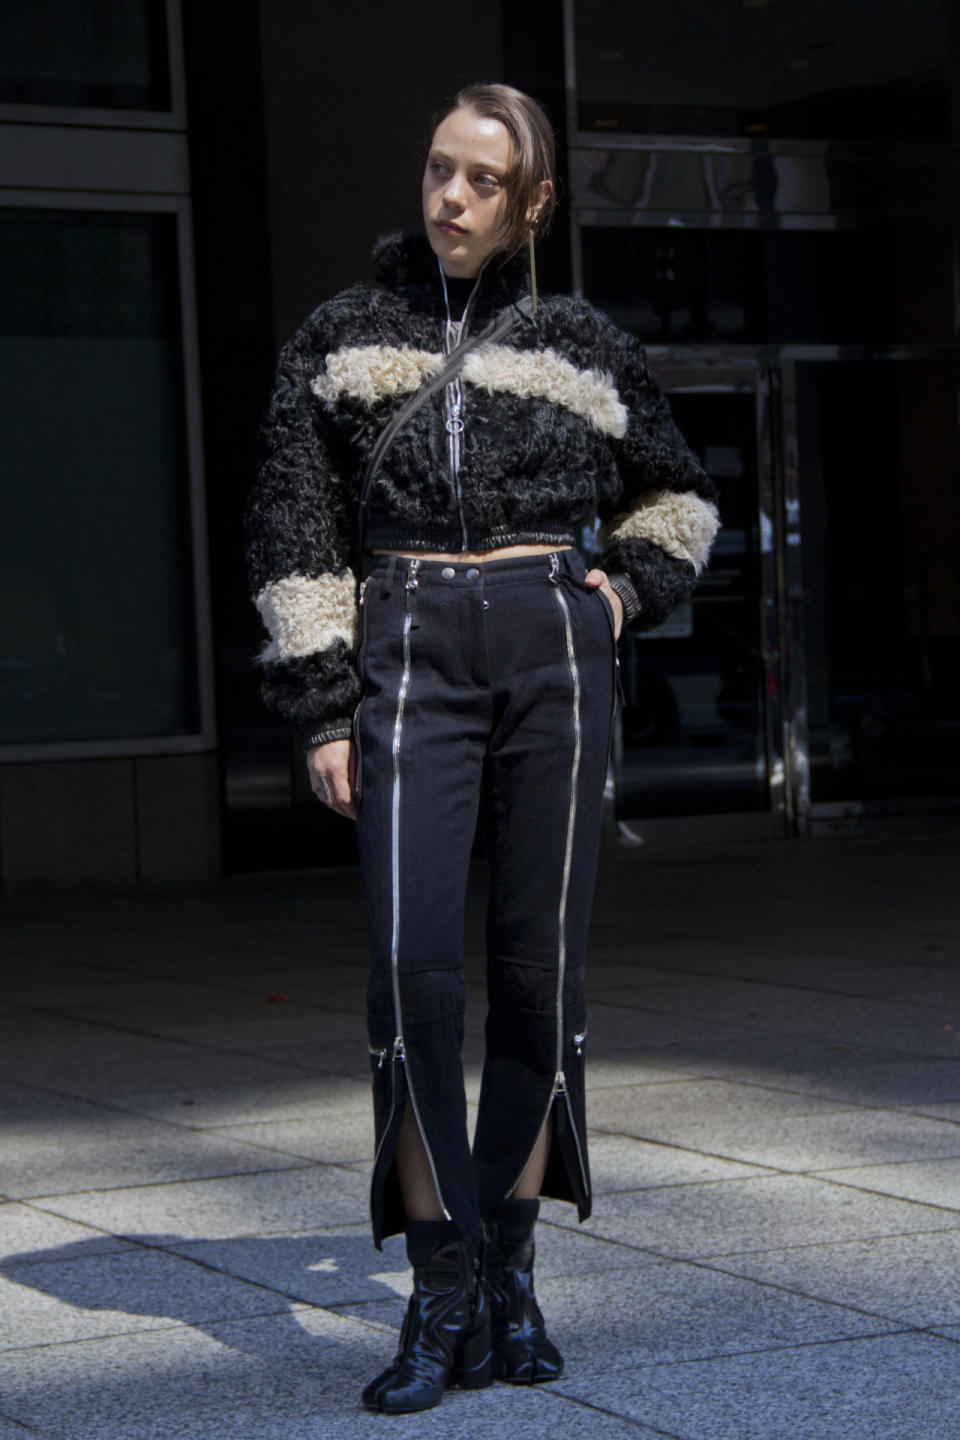 A gothic street style look at New York Fashion Week.